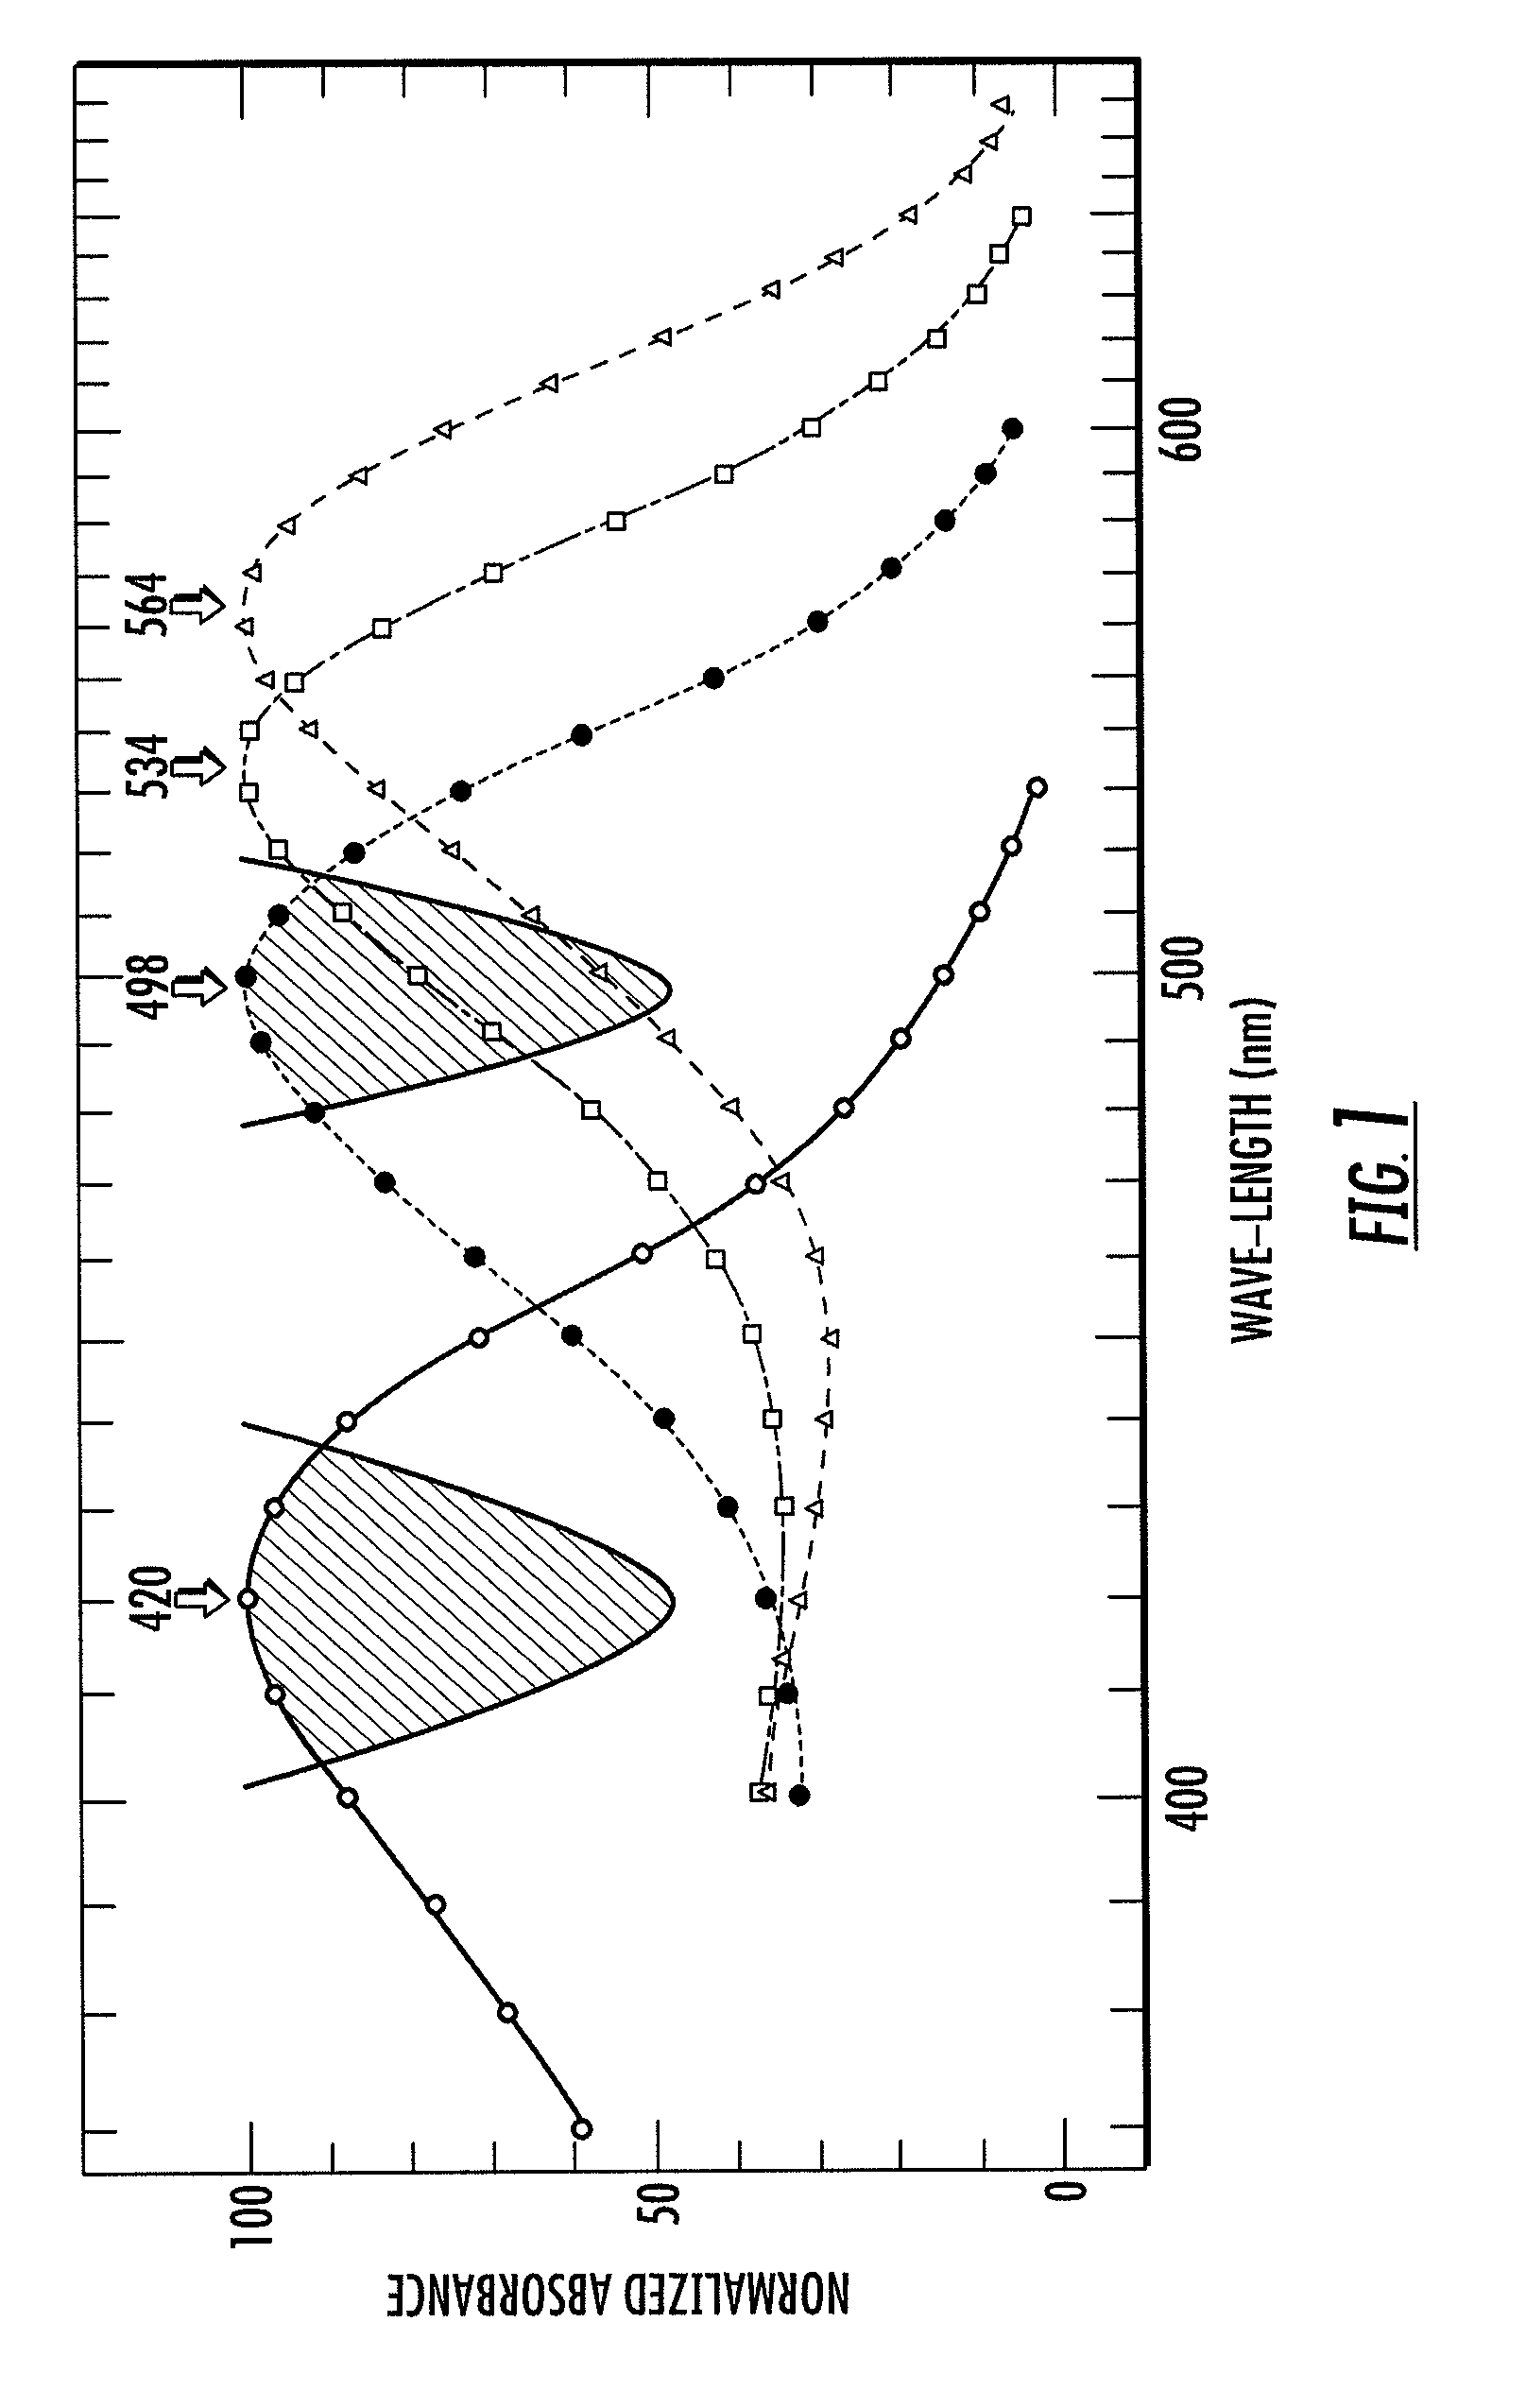 Optical Filter for Selectively Blocking Light